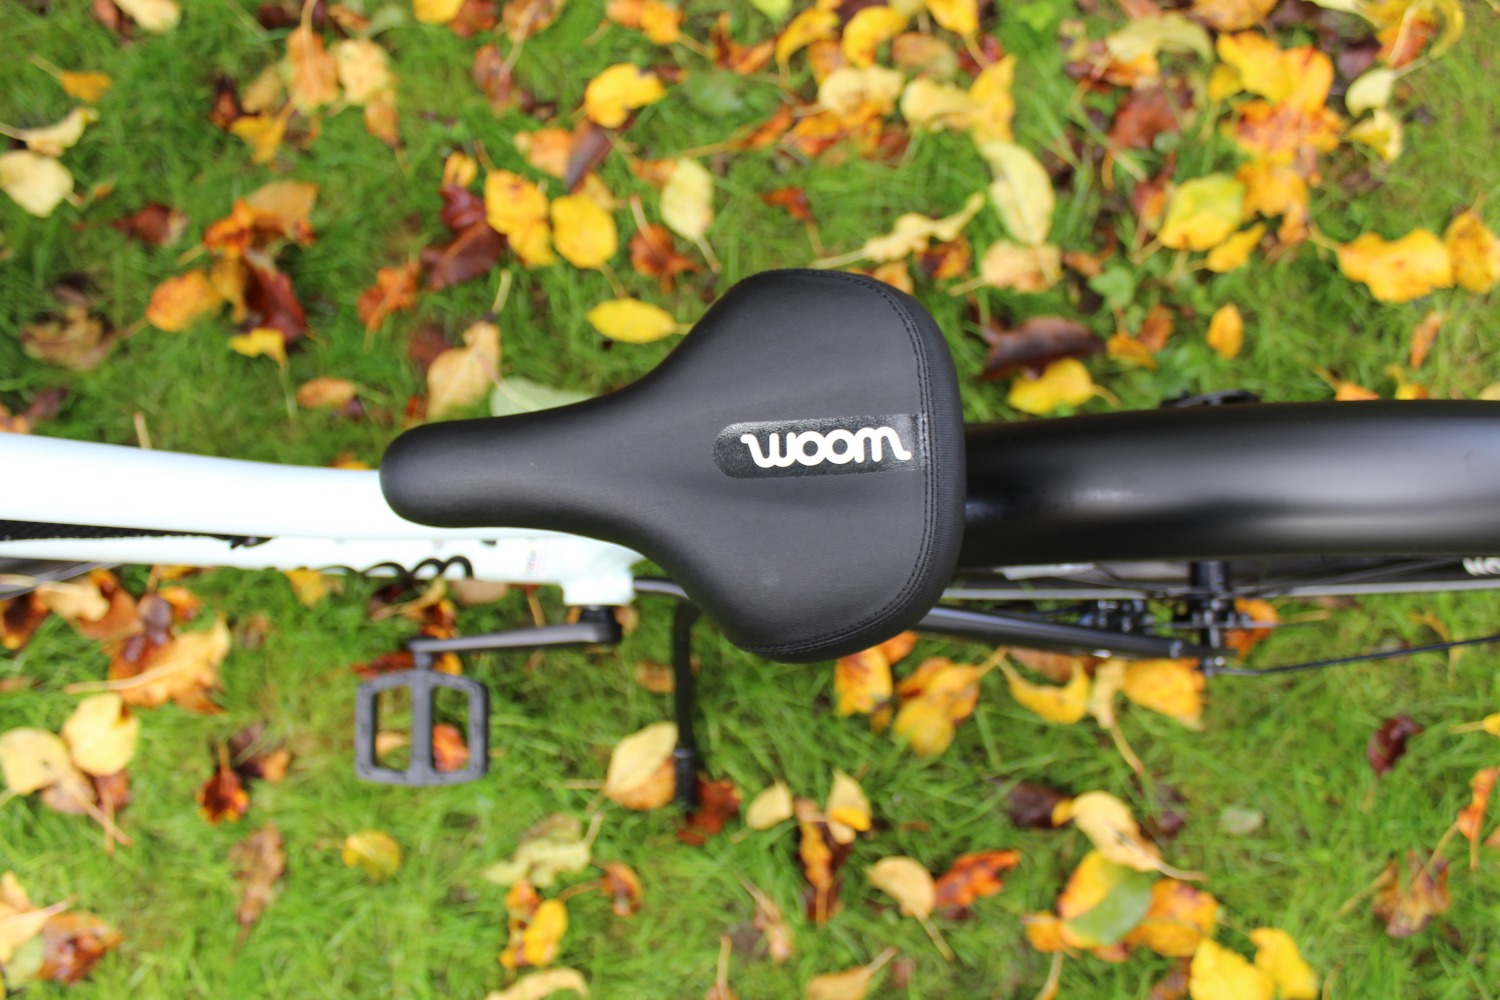 Review of the Woom NOW 5 kids bike